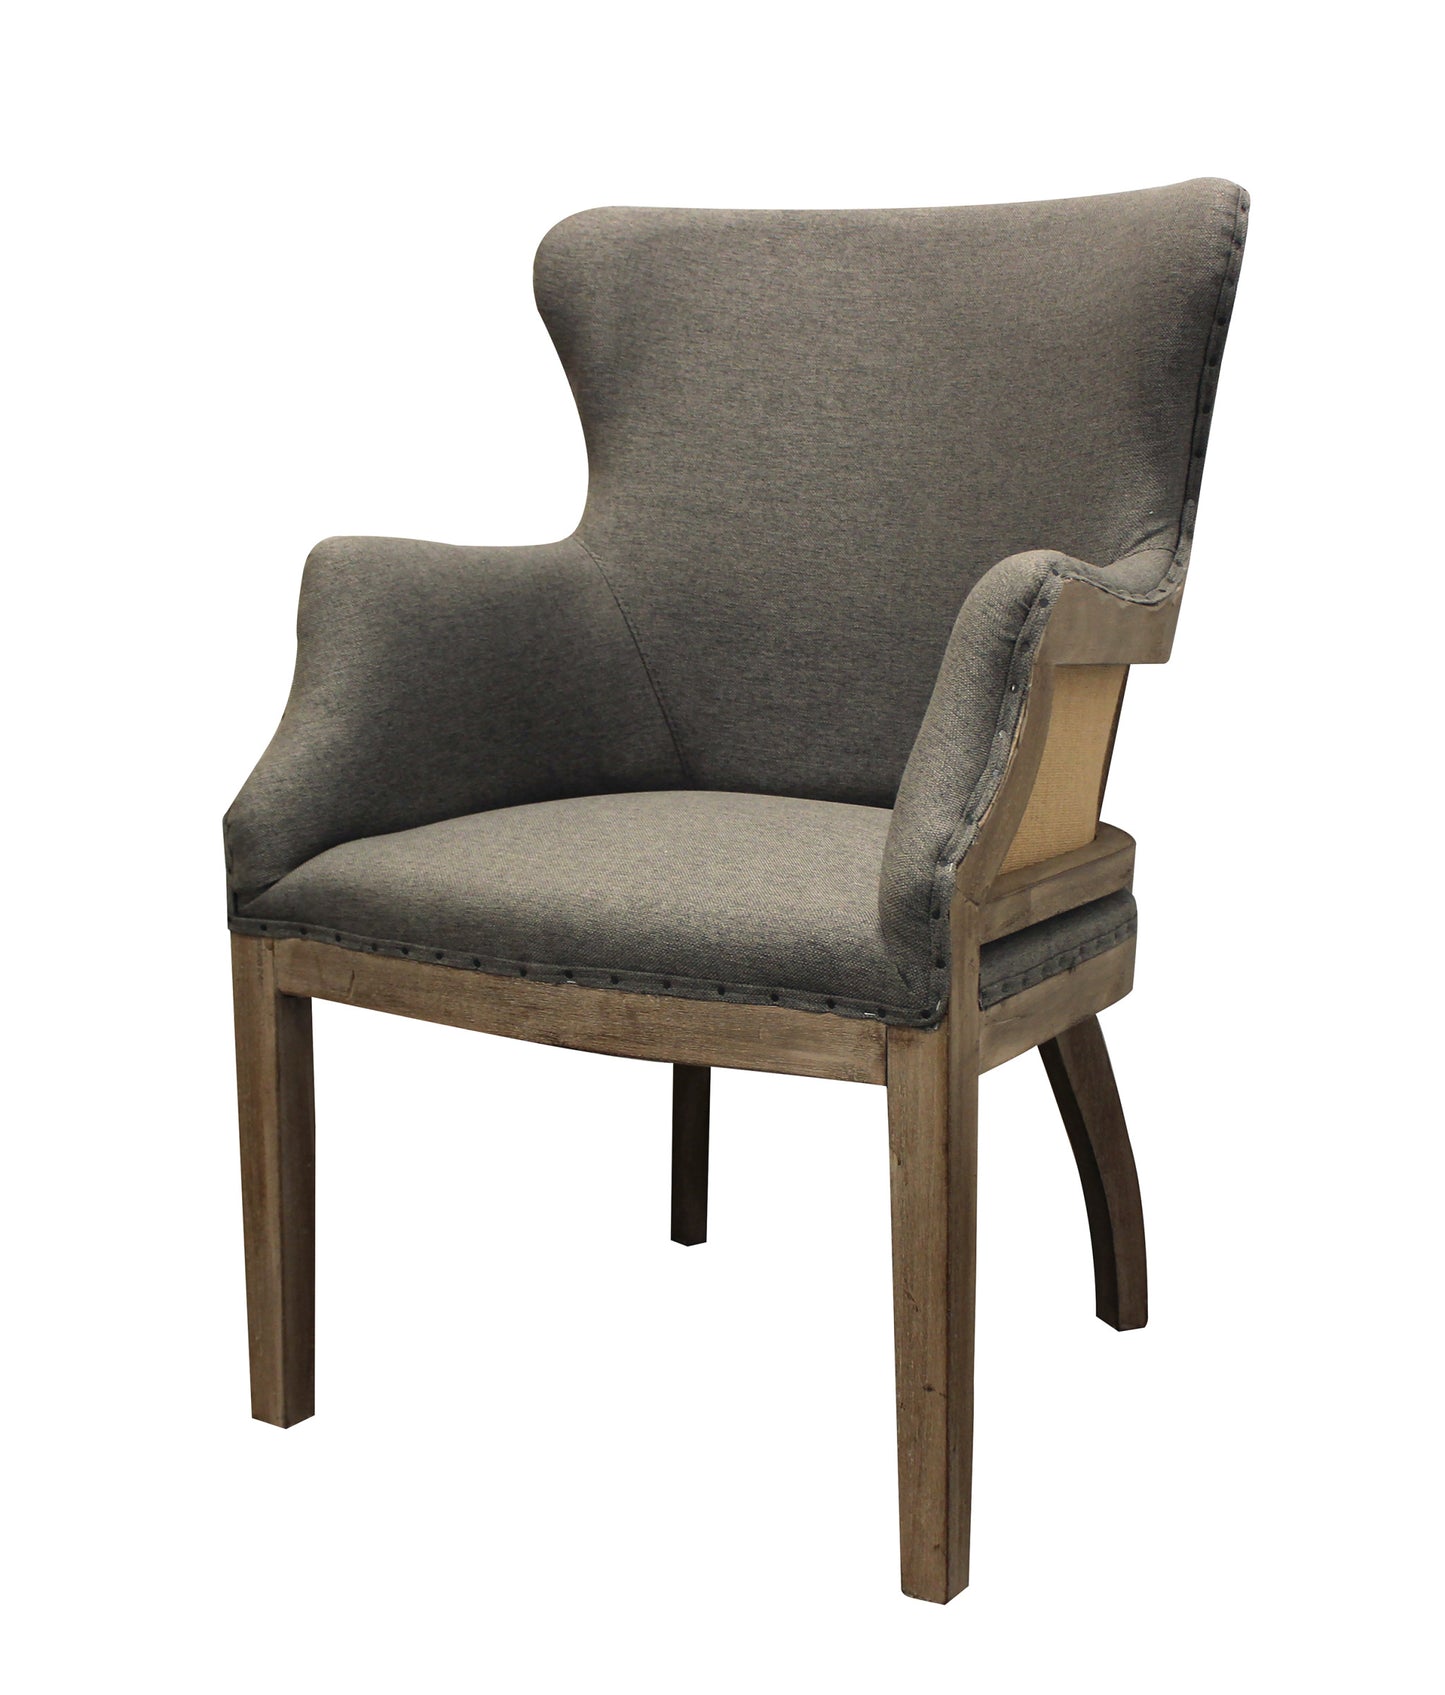 25" Gray Linen And Natural Solid Color Arm Chair